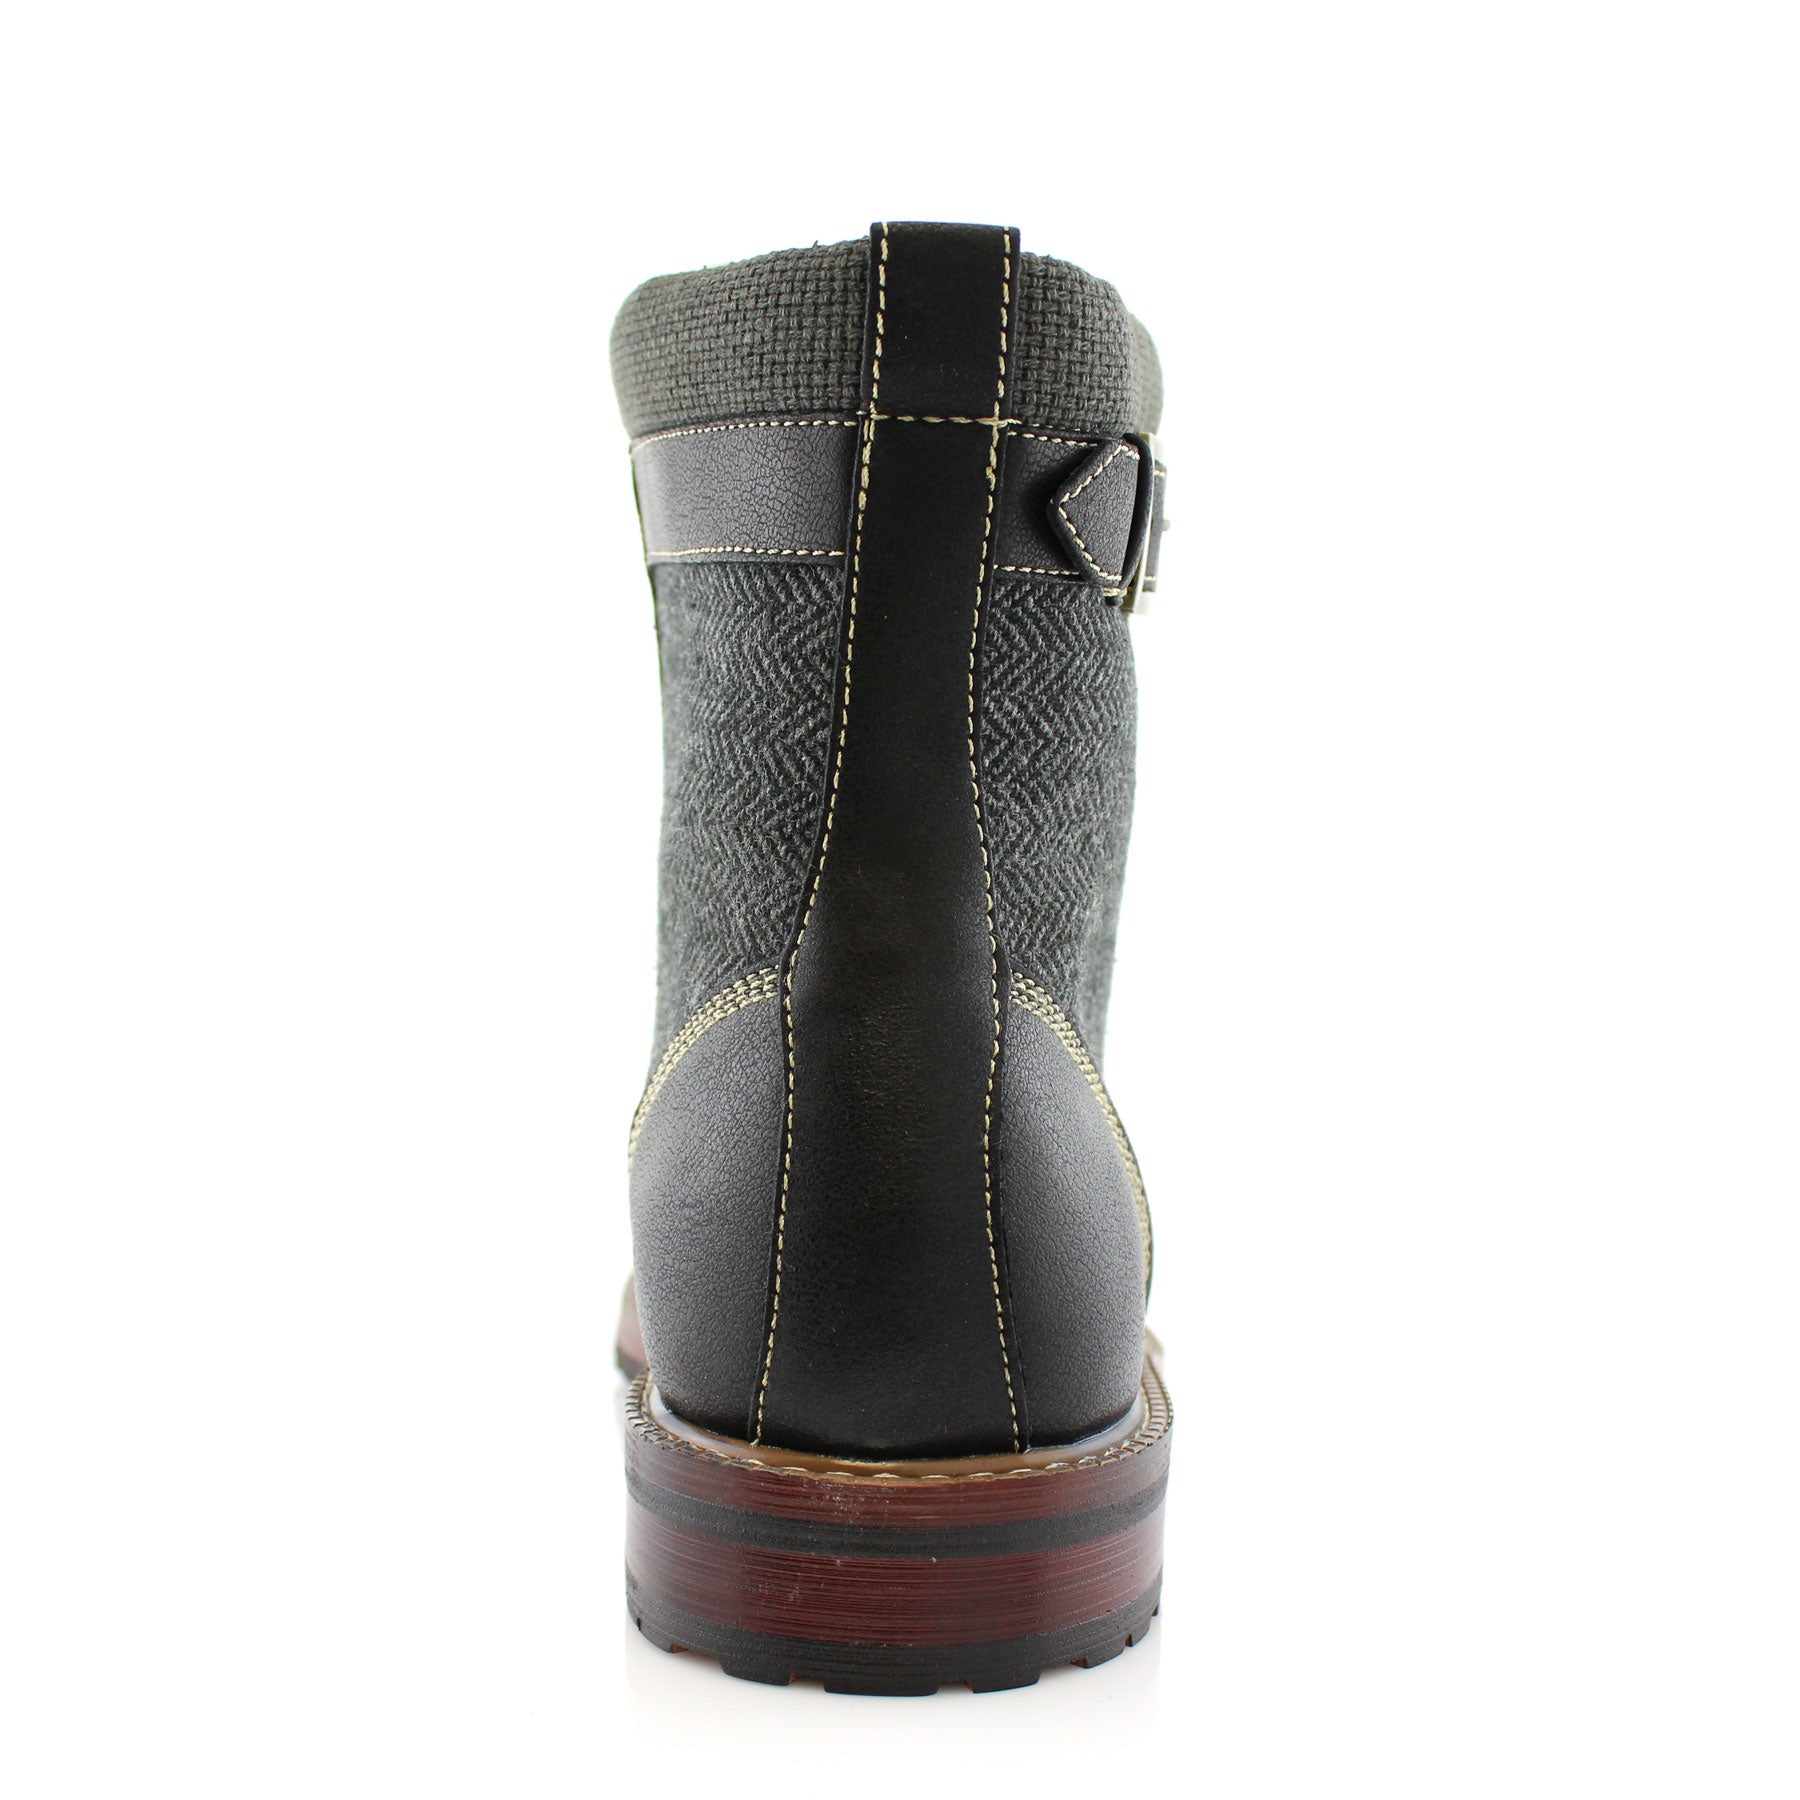 Rugged Duo-Textured Boots | Elijah by Polar Fox | Conal Footwear | Back Angle View